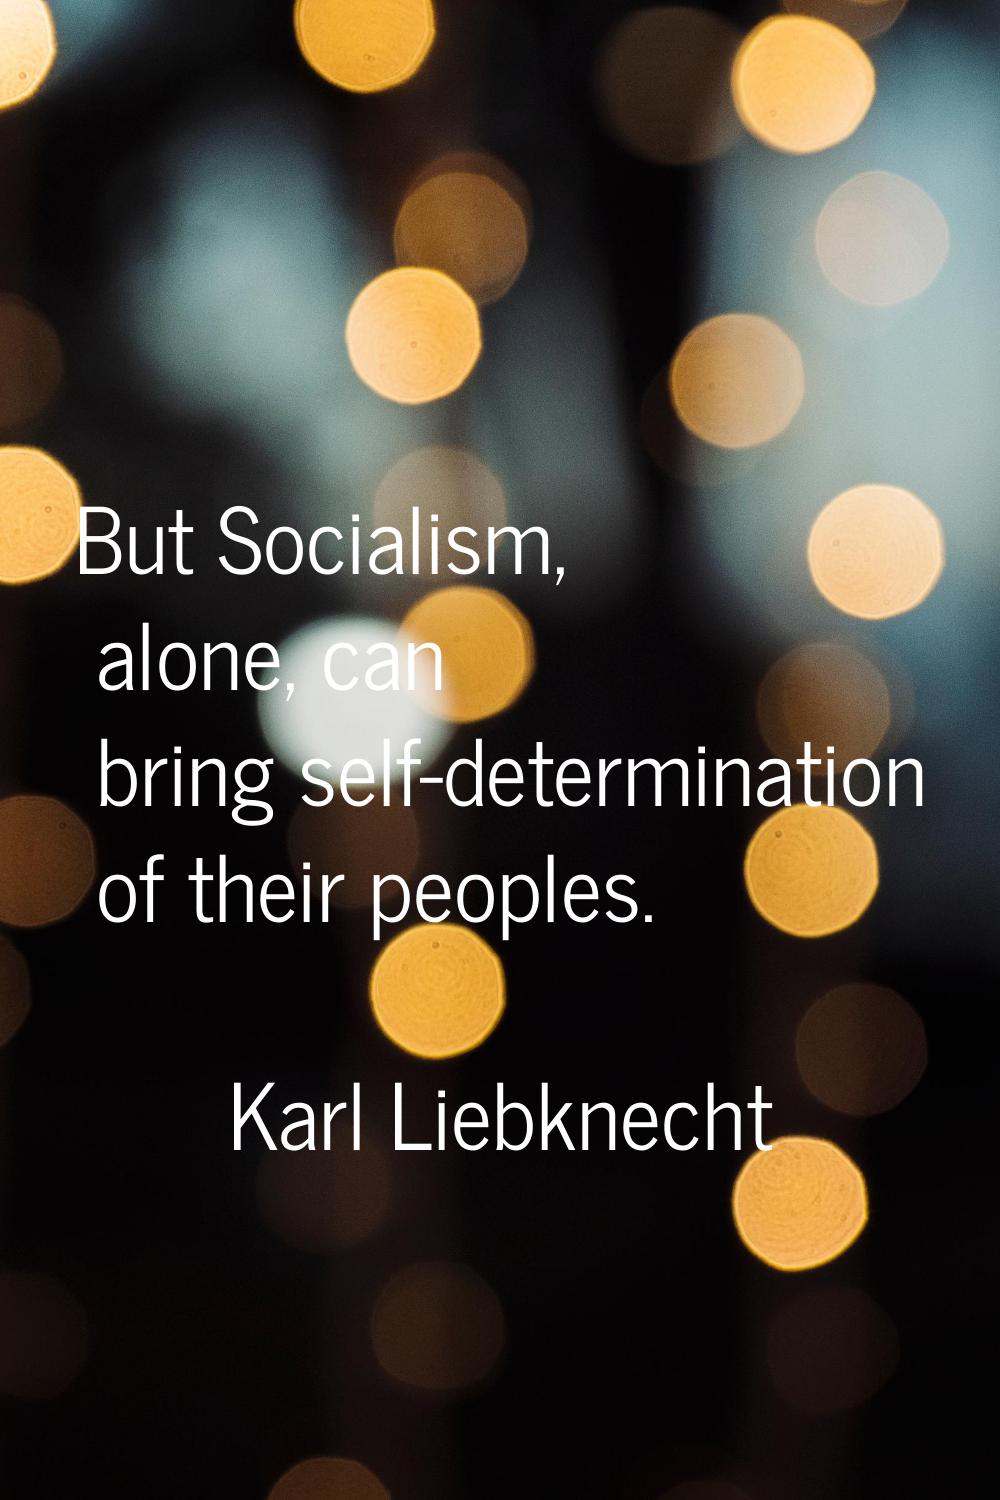 But Socialism, alone, can bring self-determination of their peoples.